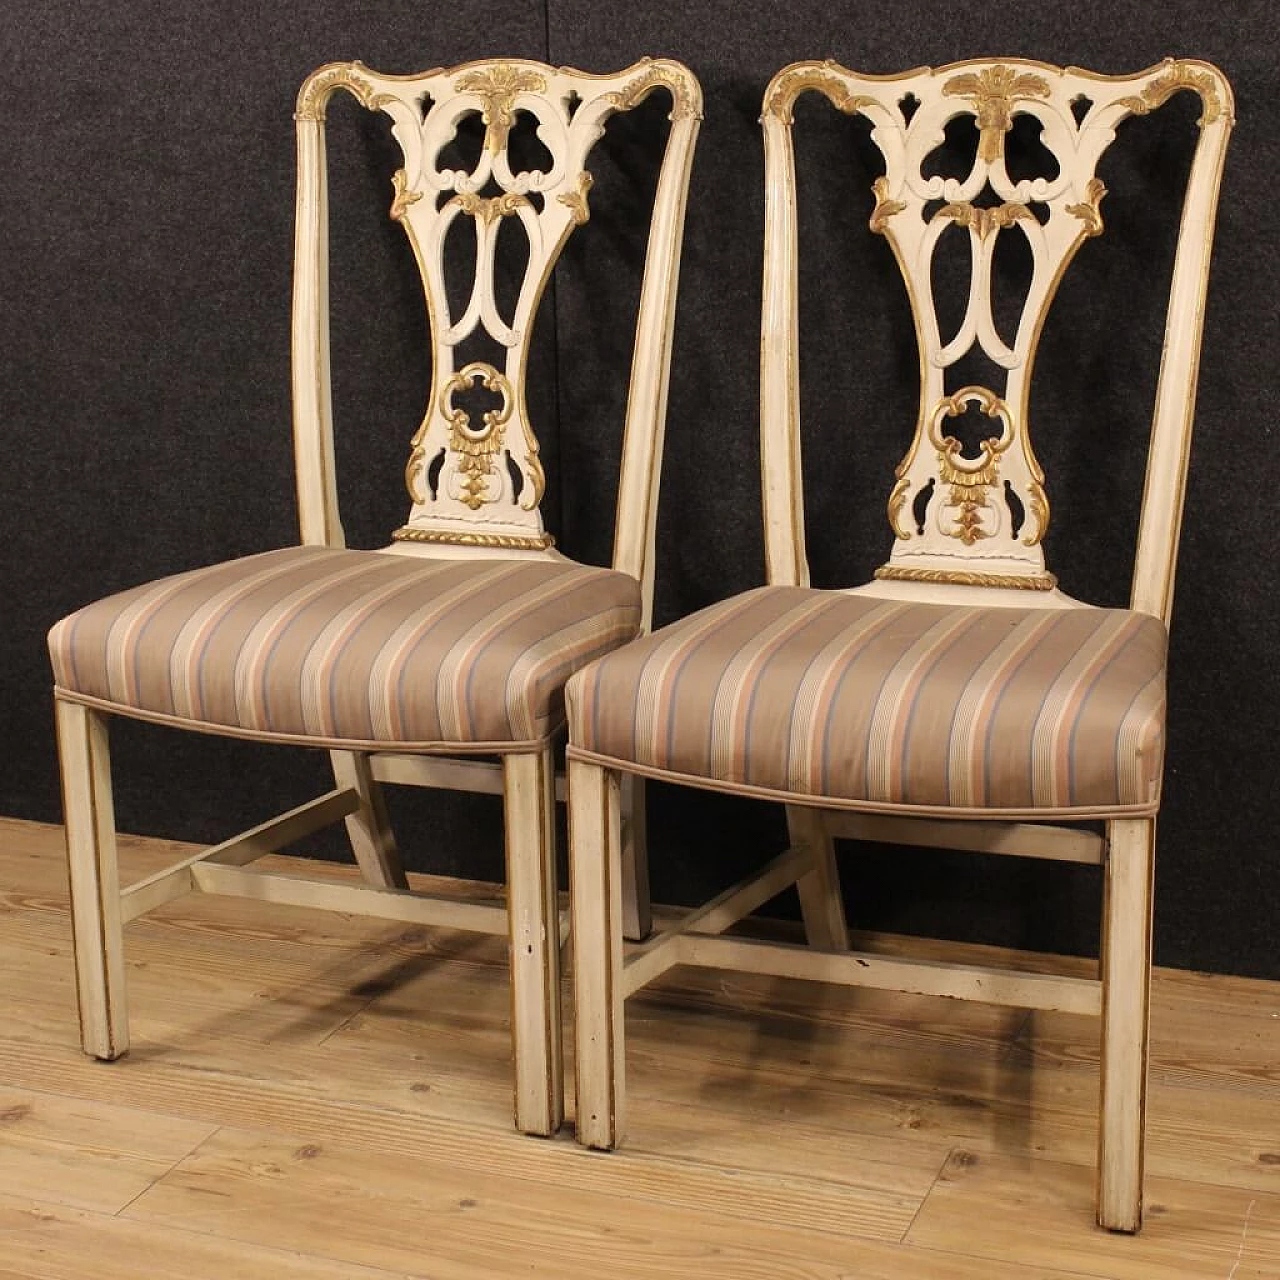 Pair of lacquered and gilded wood padded chairs 7